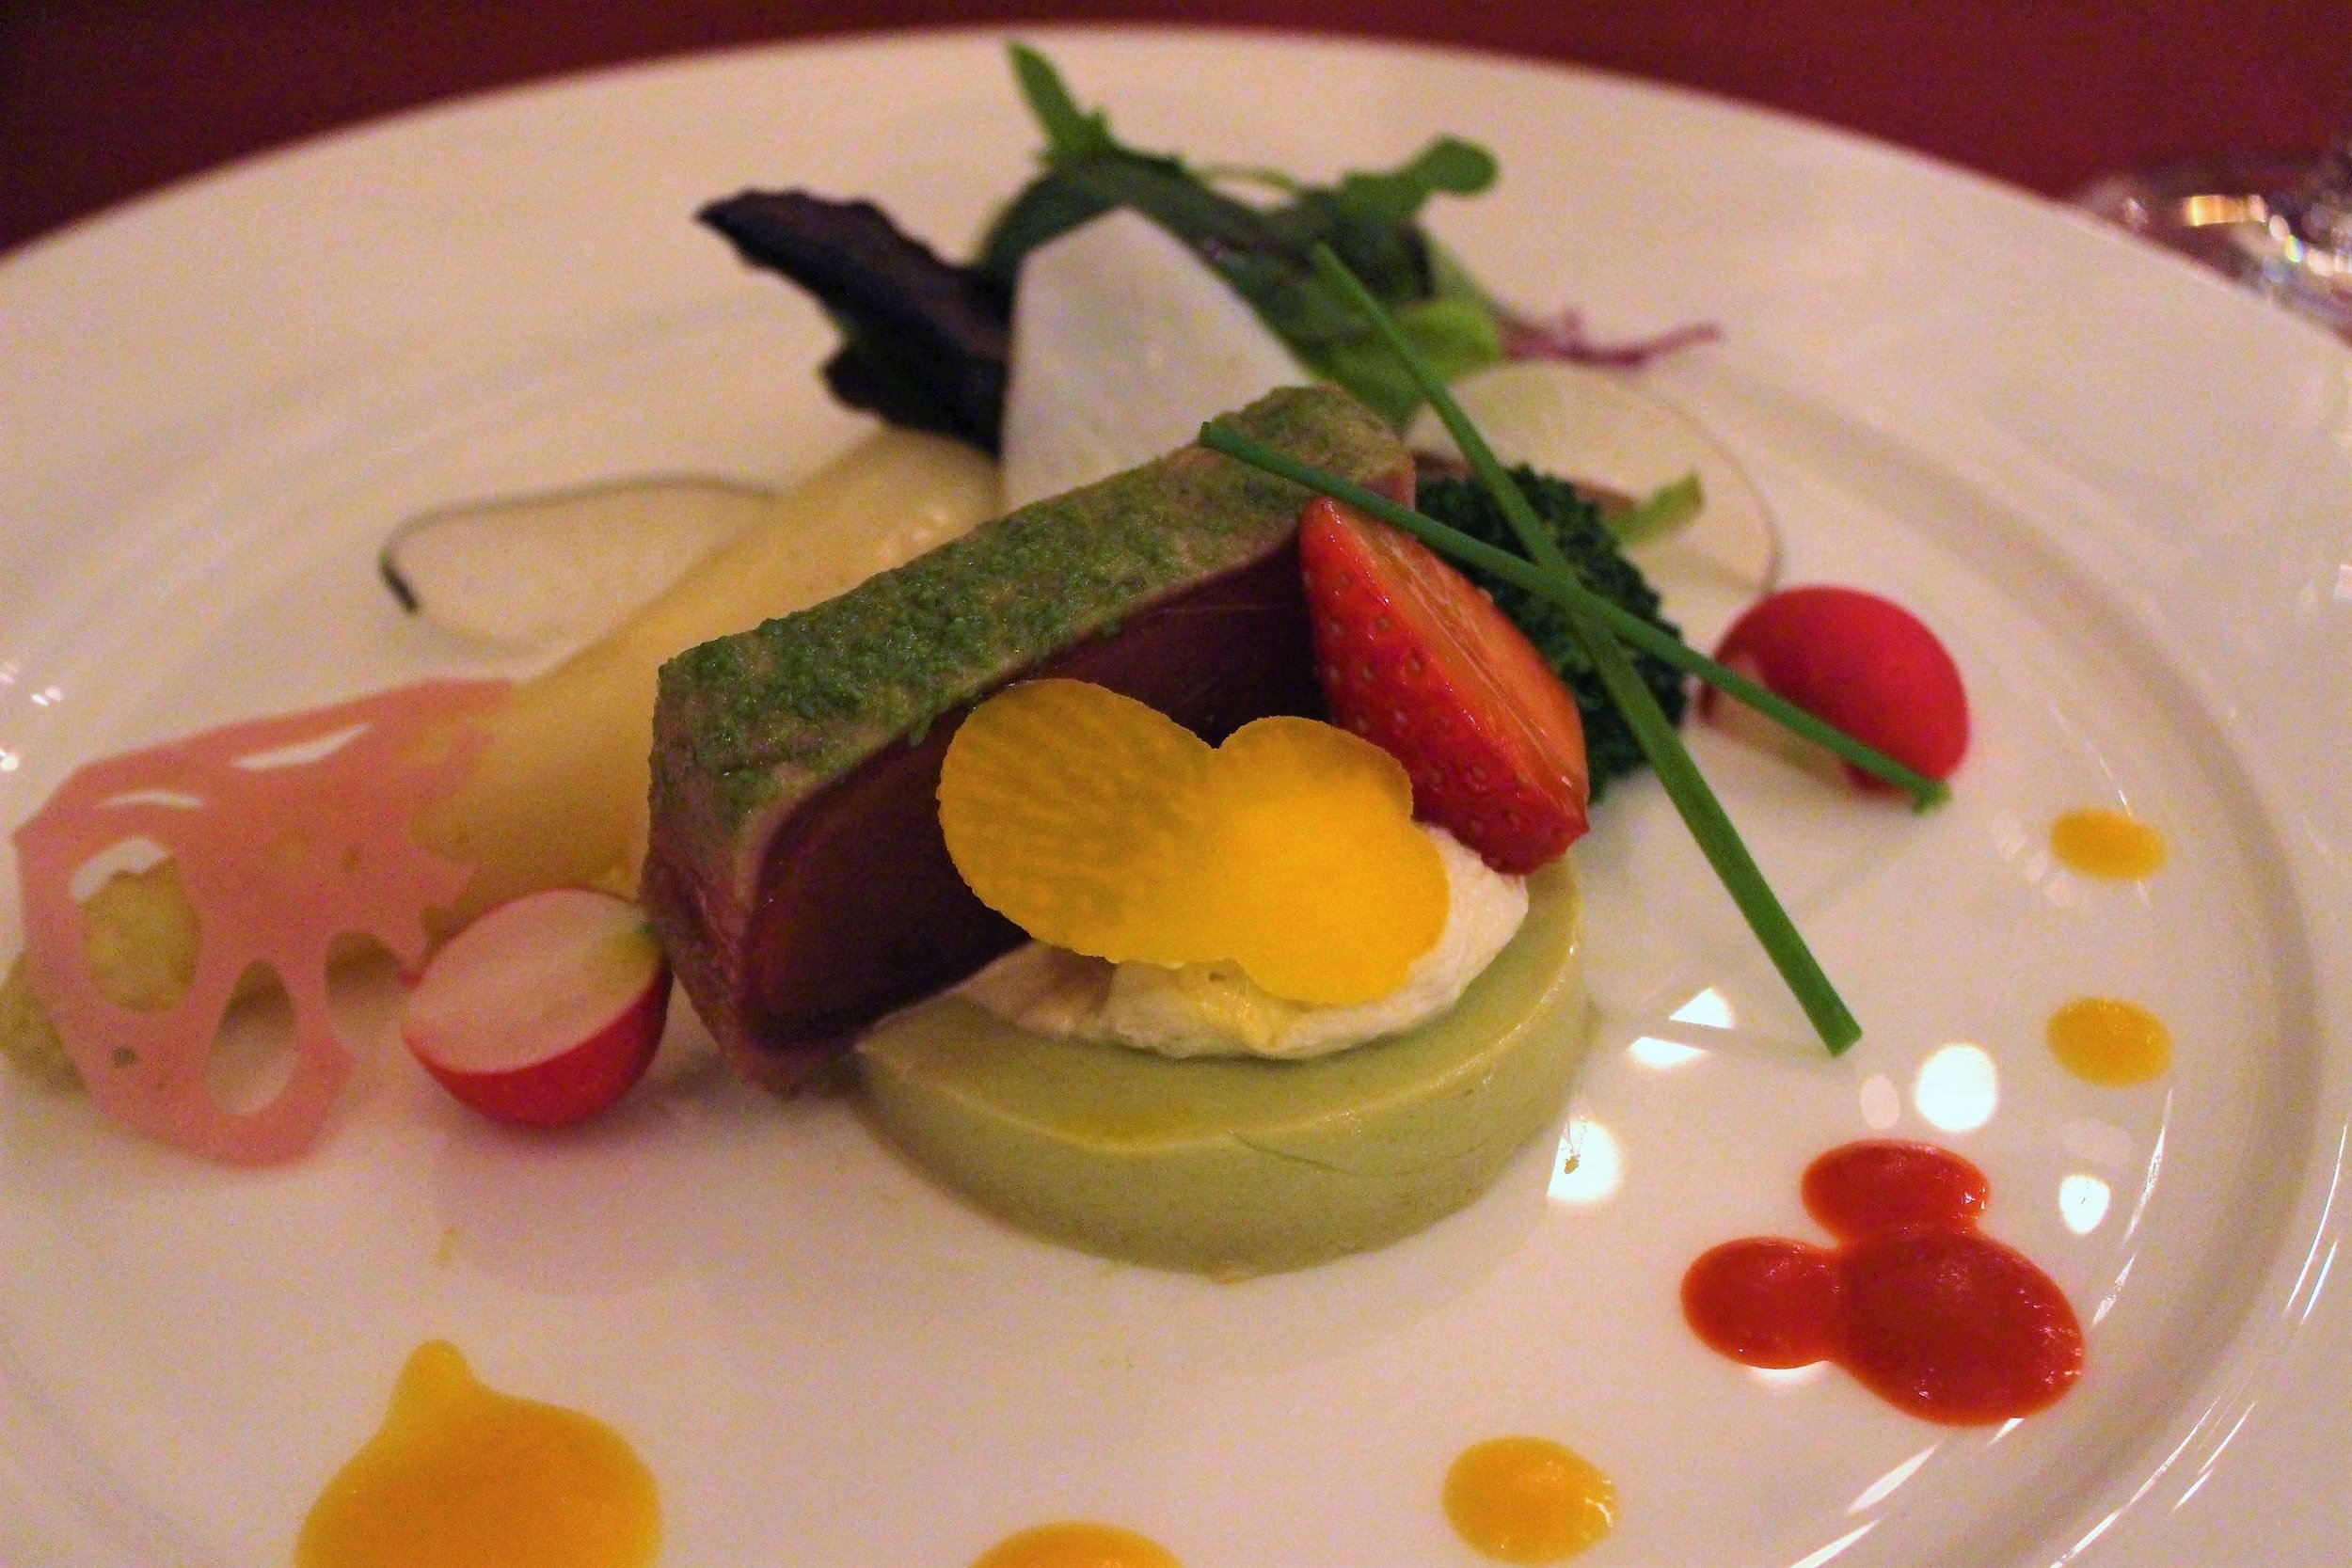 Marinated Tuna with Avocado Mousse and Assorted Vegetables at Magellan’s in DisneySea, Tokyo, Japan